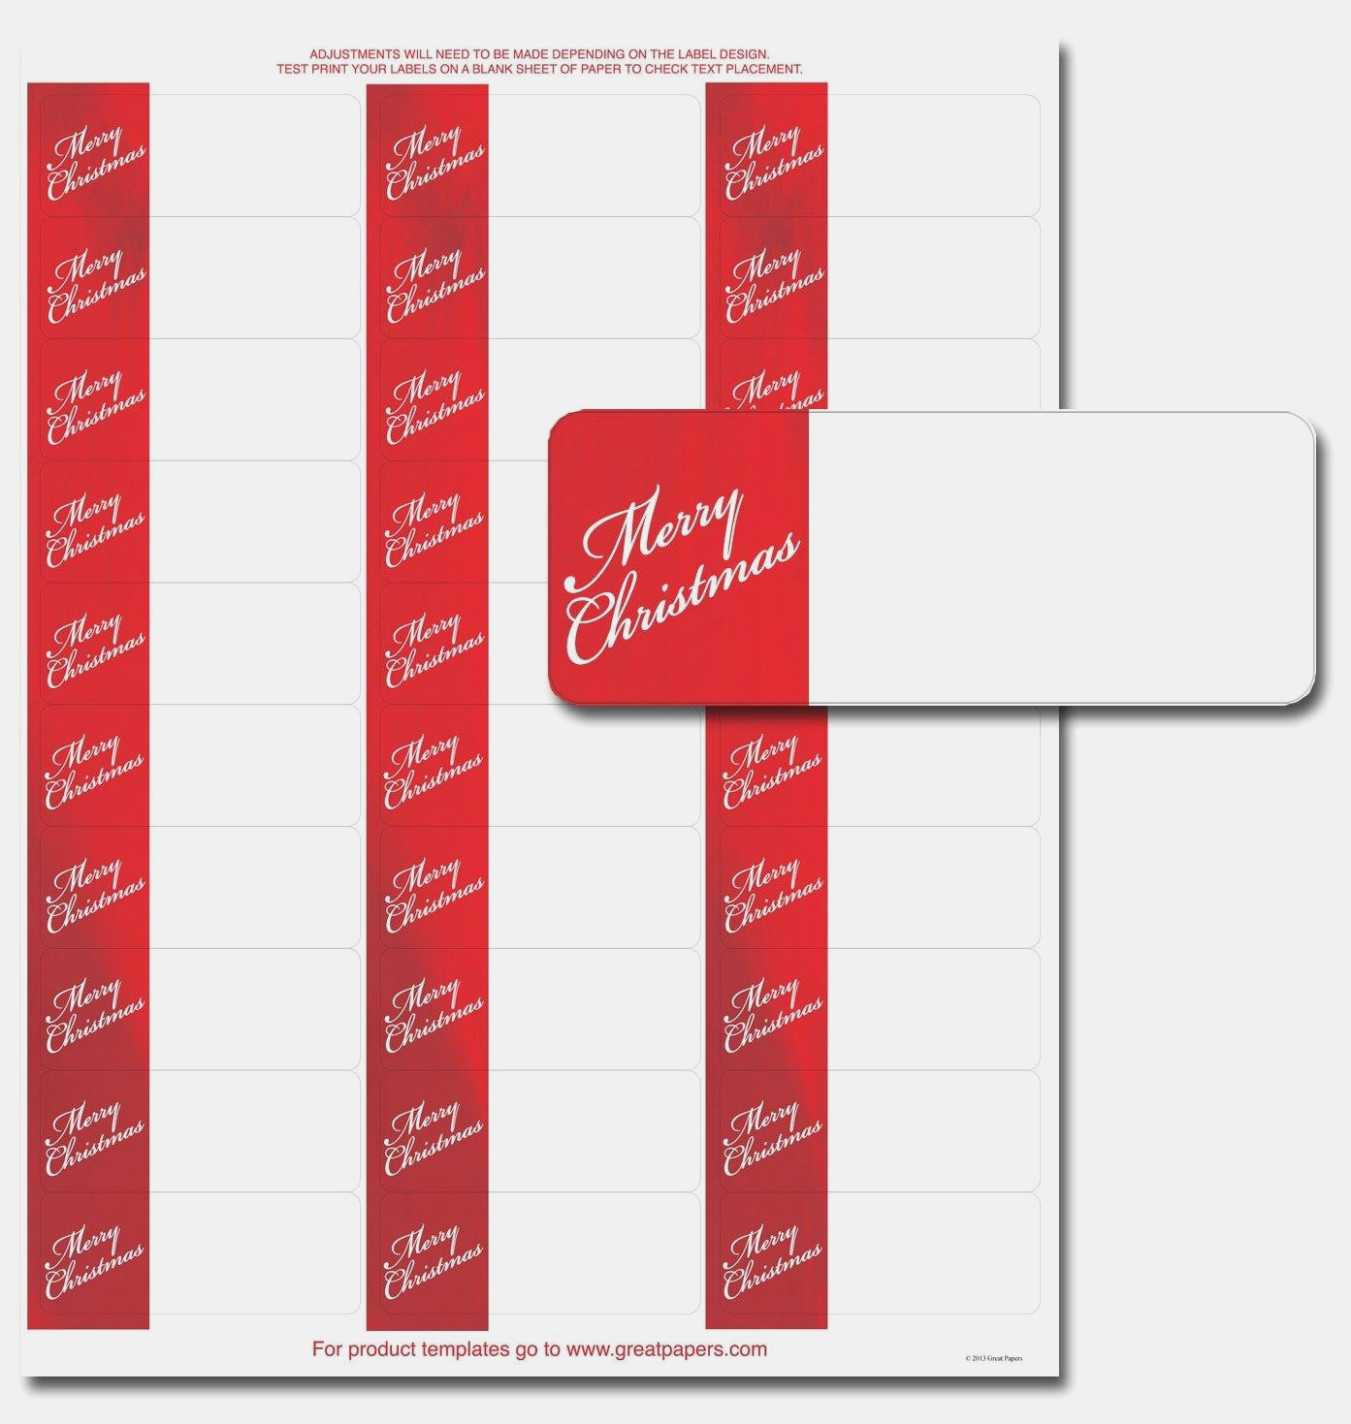 How To Print Avery 5160 Labels Tunu redmini co In Christmas Return Address Labels Template 